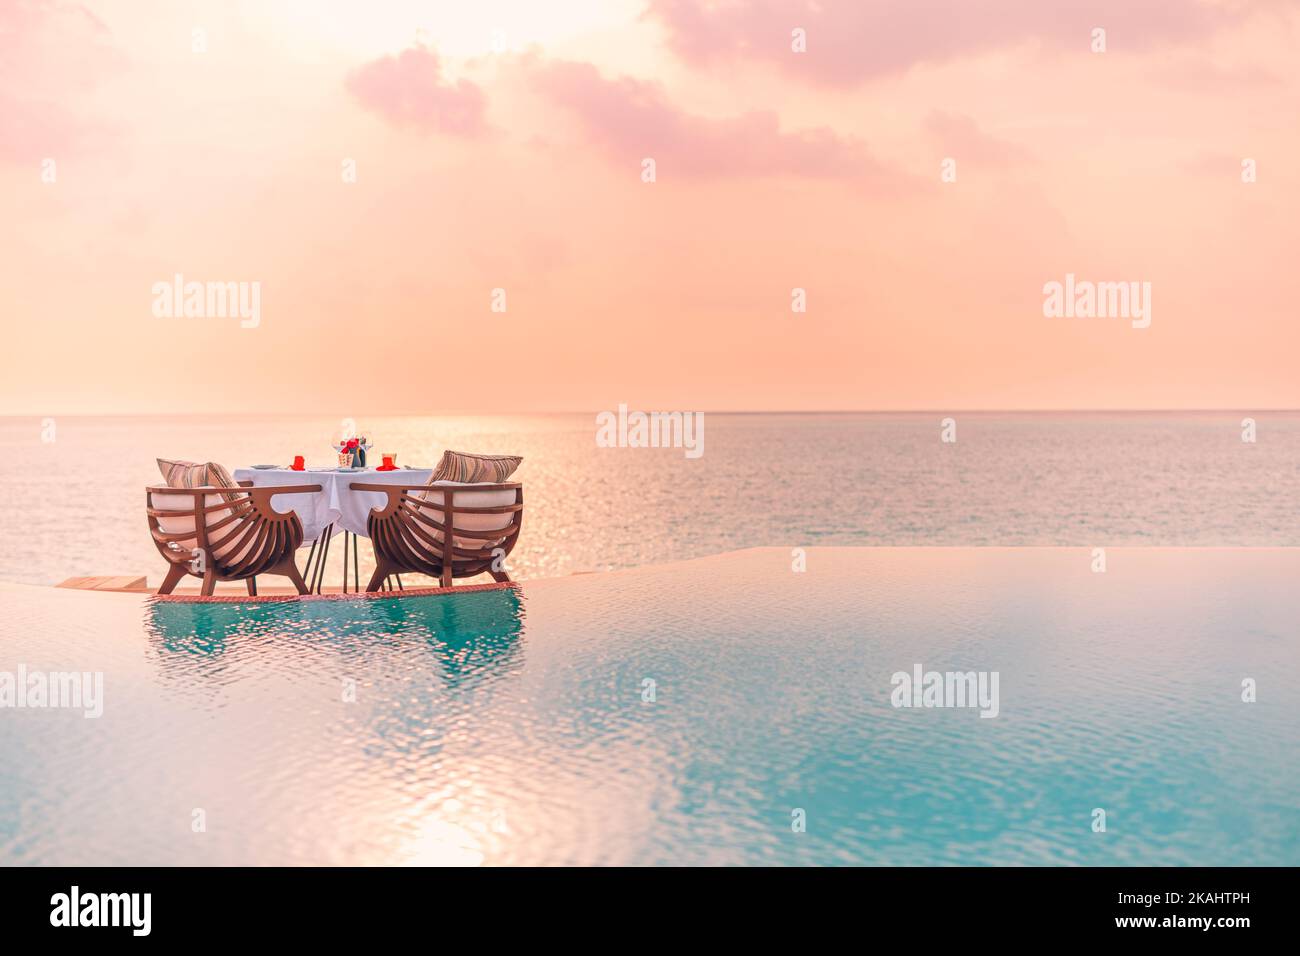 Summer love and romance table setup for a romantic dinner meal with luxury infinity pool reflection chairs under sunset sky and sea in background Stock Photo